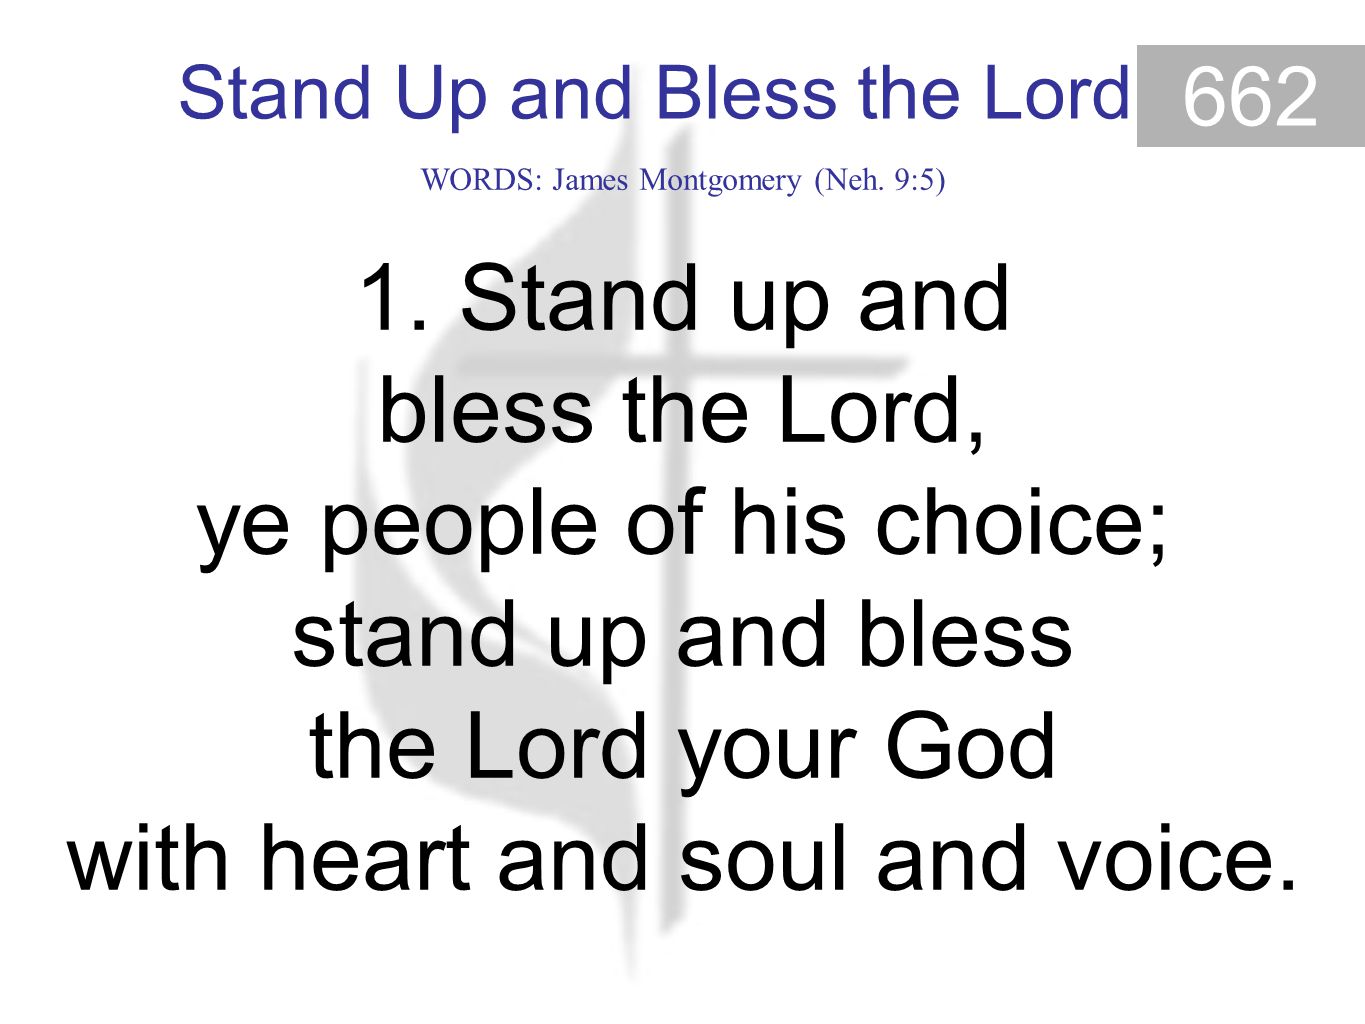 Stand Up and Bless the Lord 662 Stand Up and Bless the Lord (1) WORDS: James Montgomery (Neh.